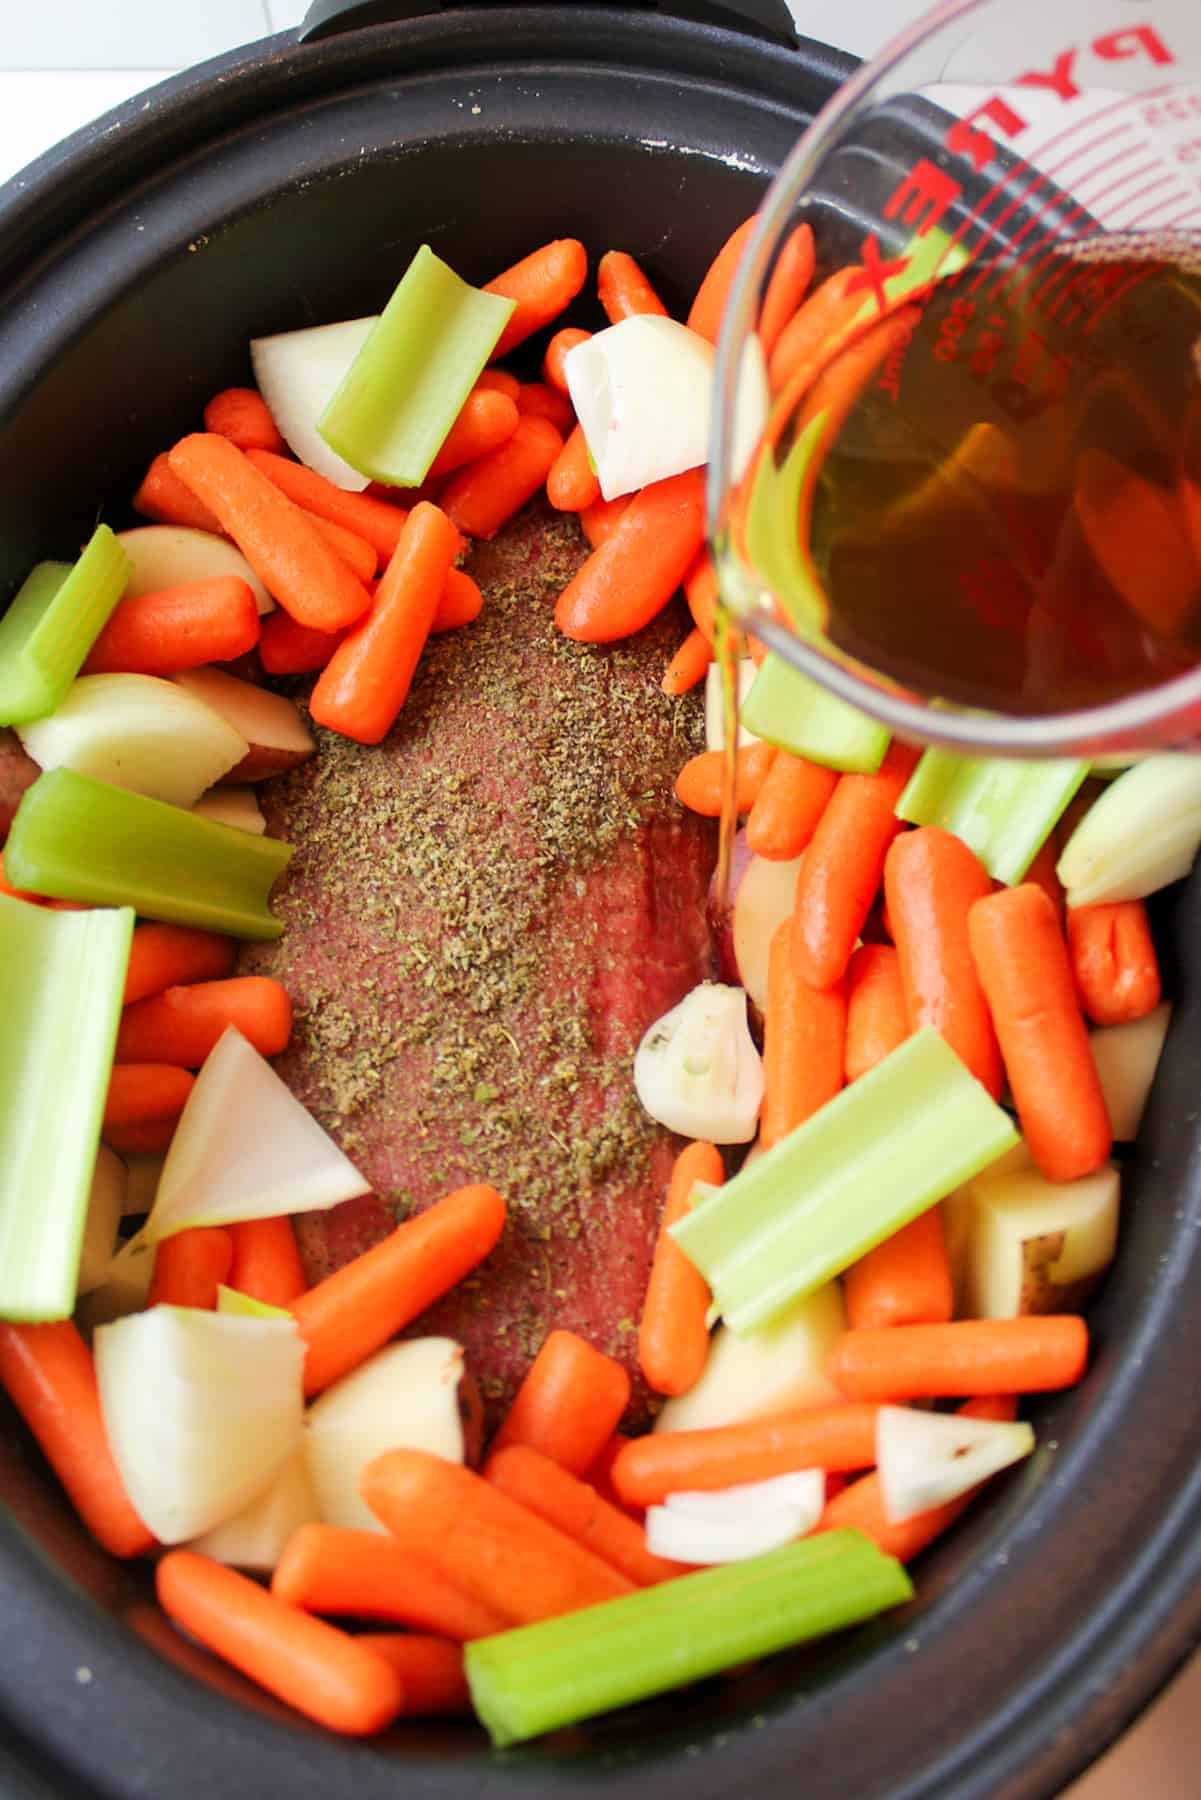 pouring beef broth into the crockpot.